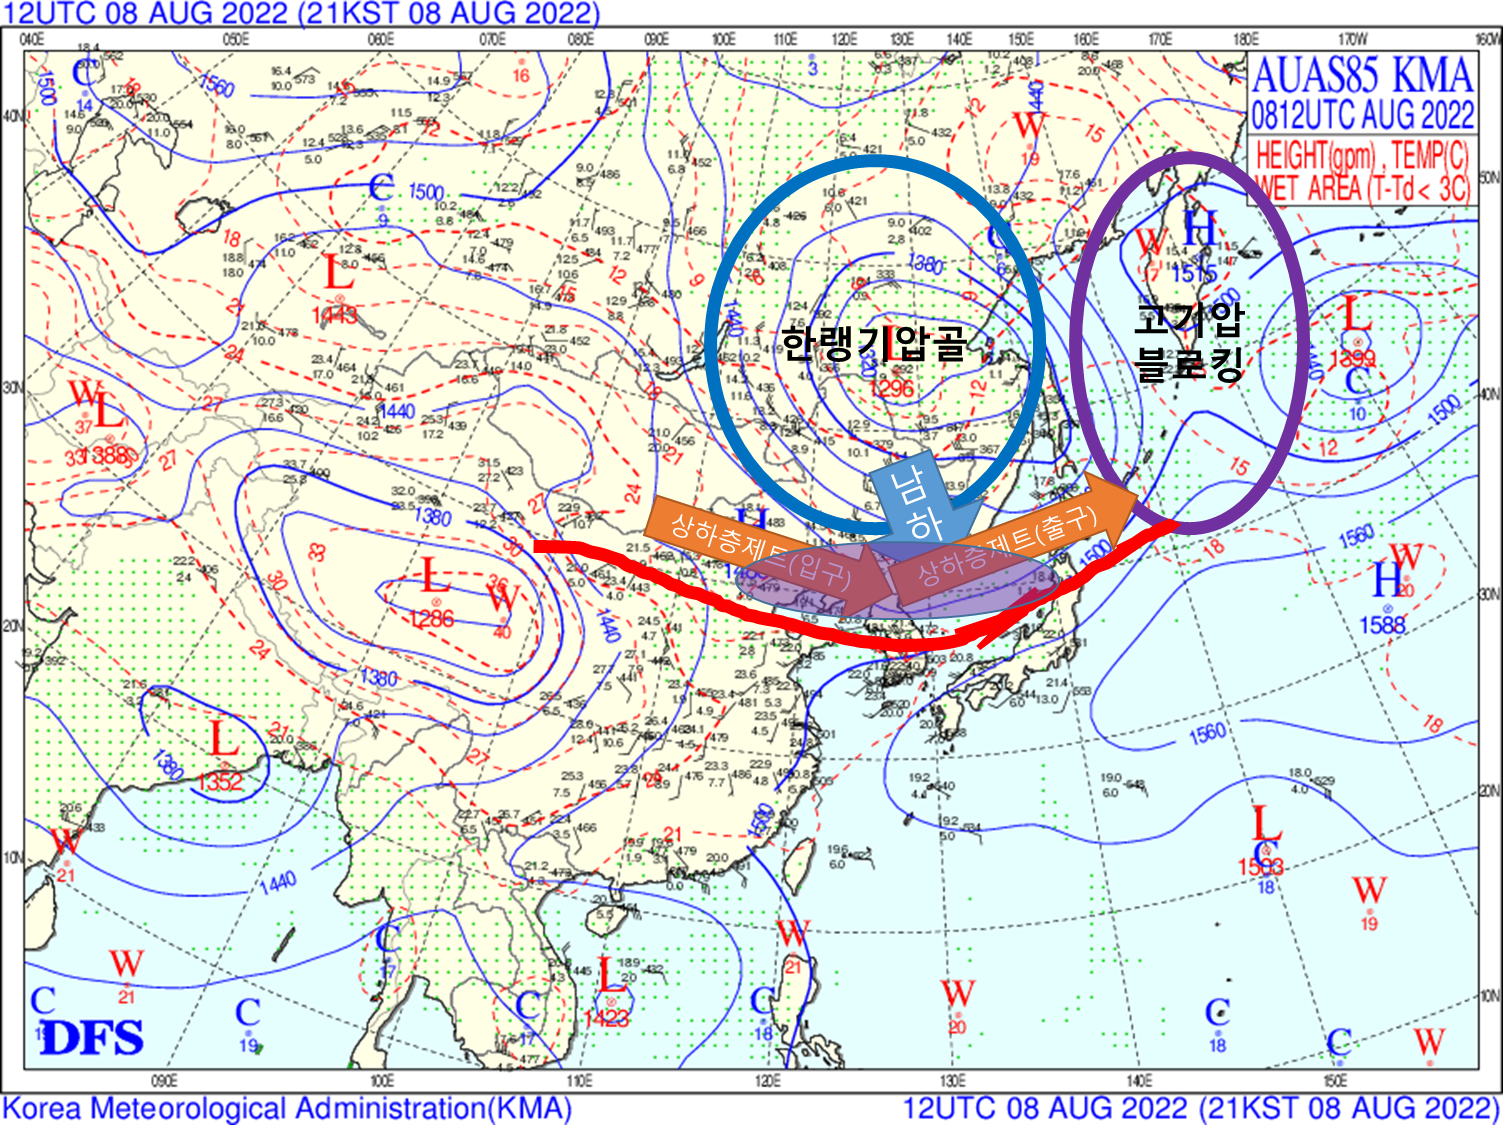 850hPa